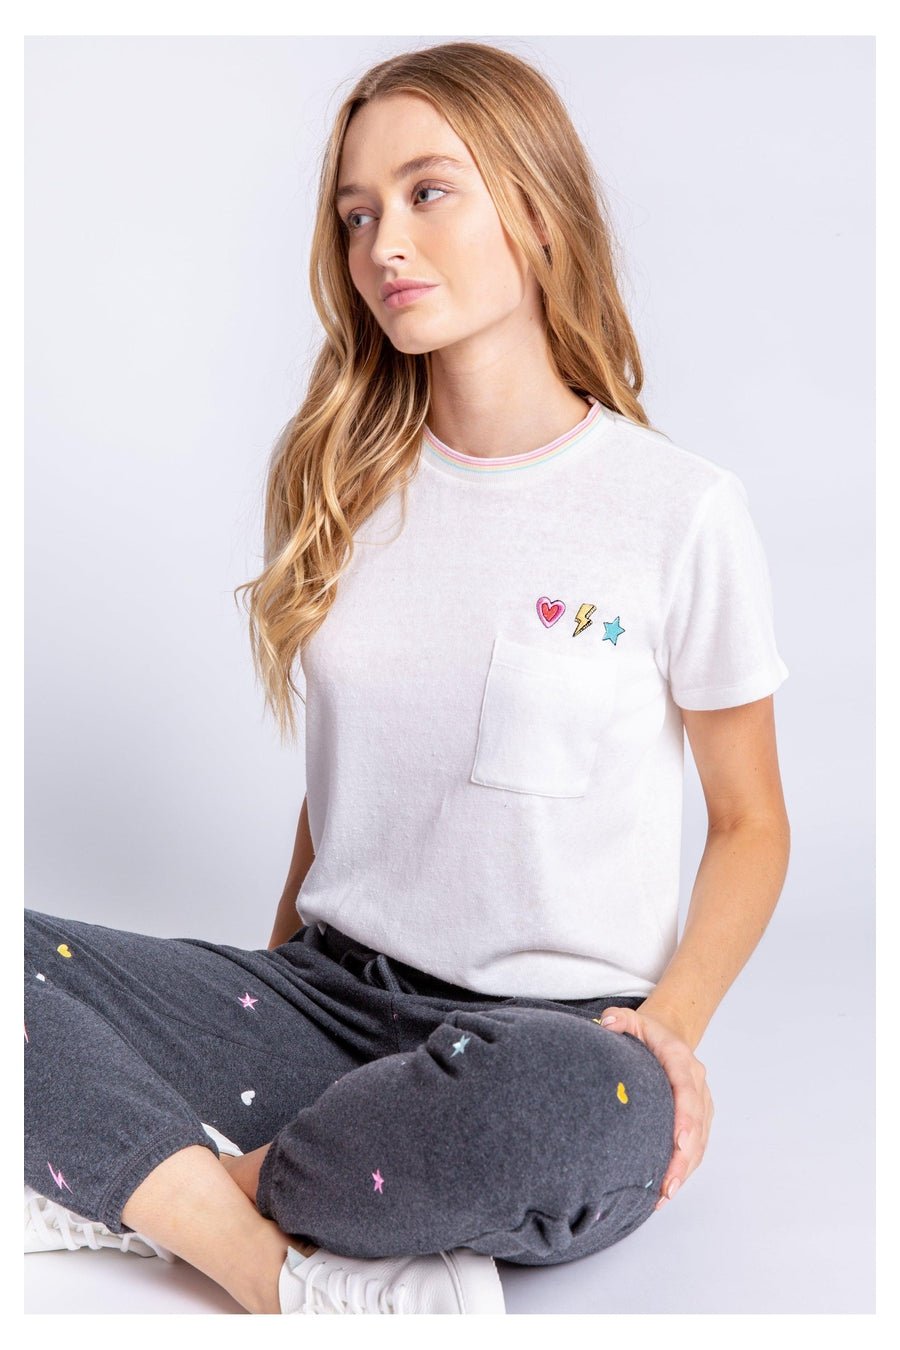 Shop PJ Salvage One Love Embroidered T-Shirt - Premium T-Shirt from PJ Salvage Online now at Spoiled Brat 